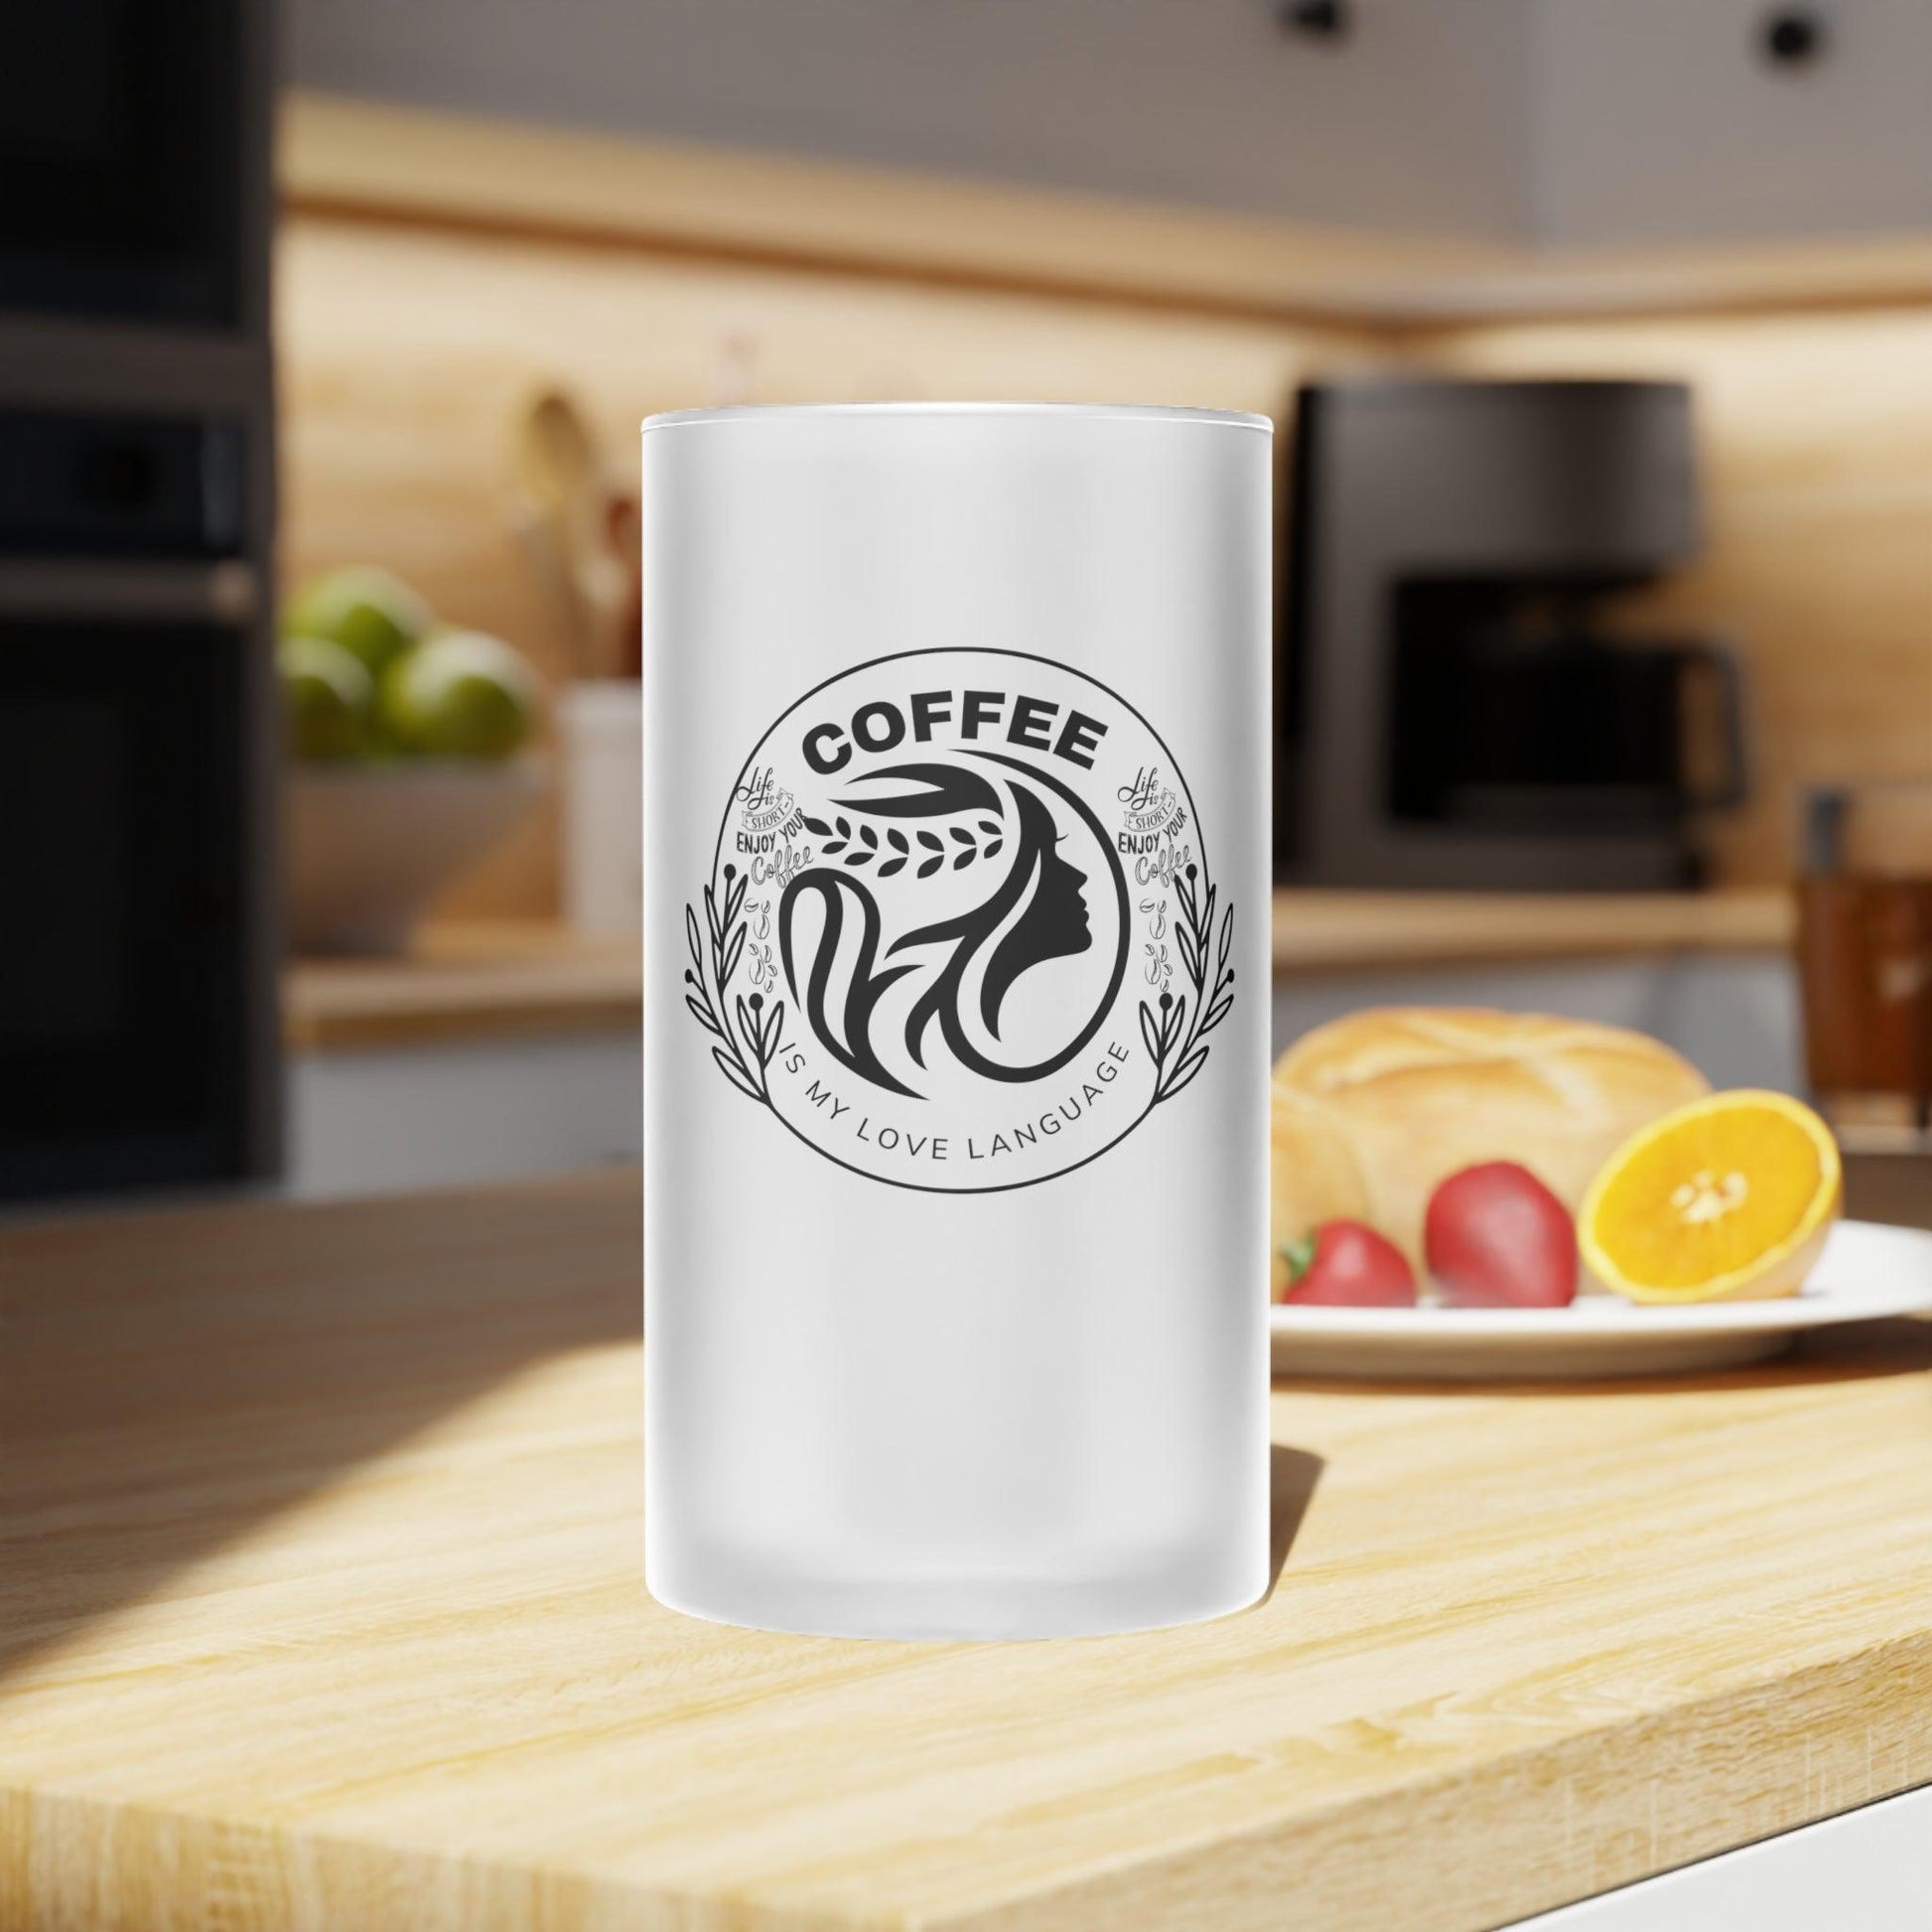 Coffee Frosted Glass Latte Mug - COFFEEBRE